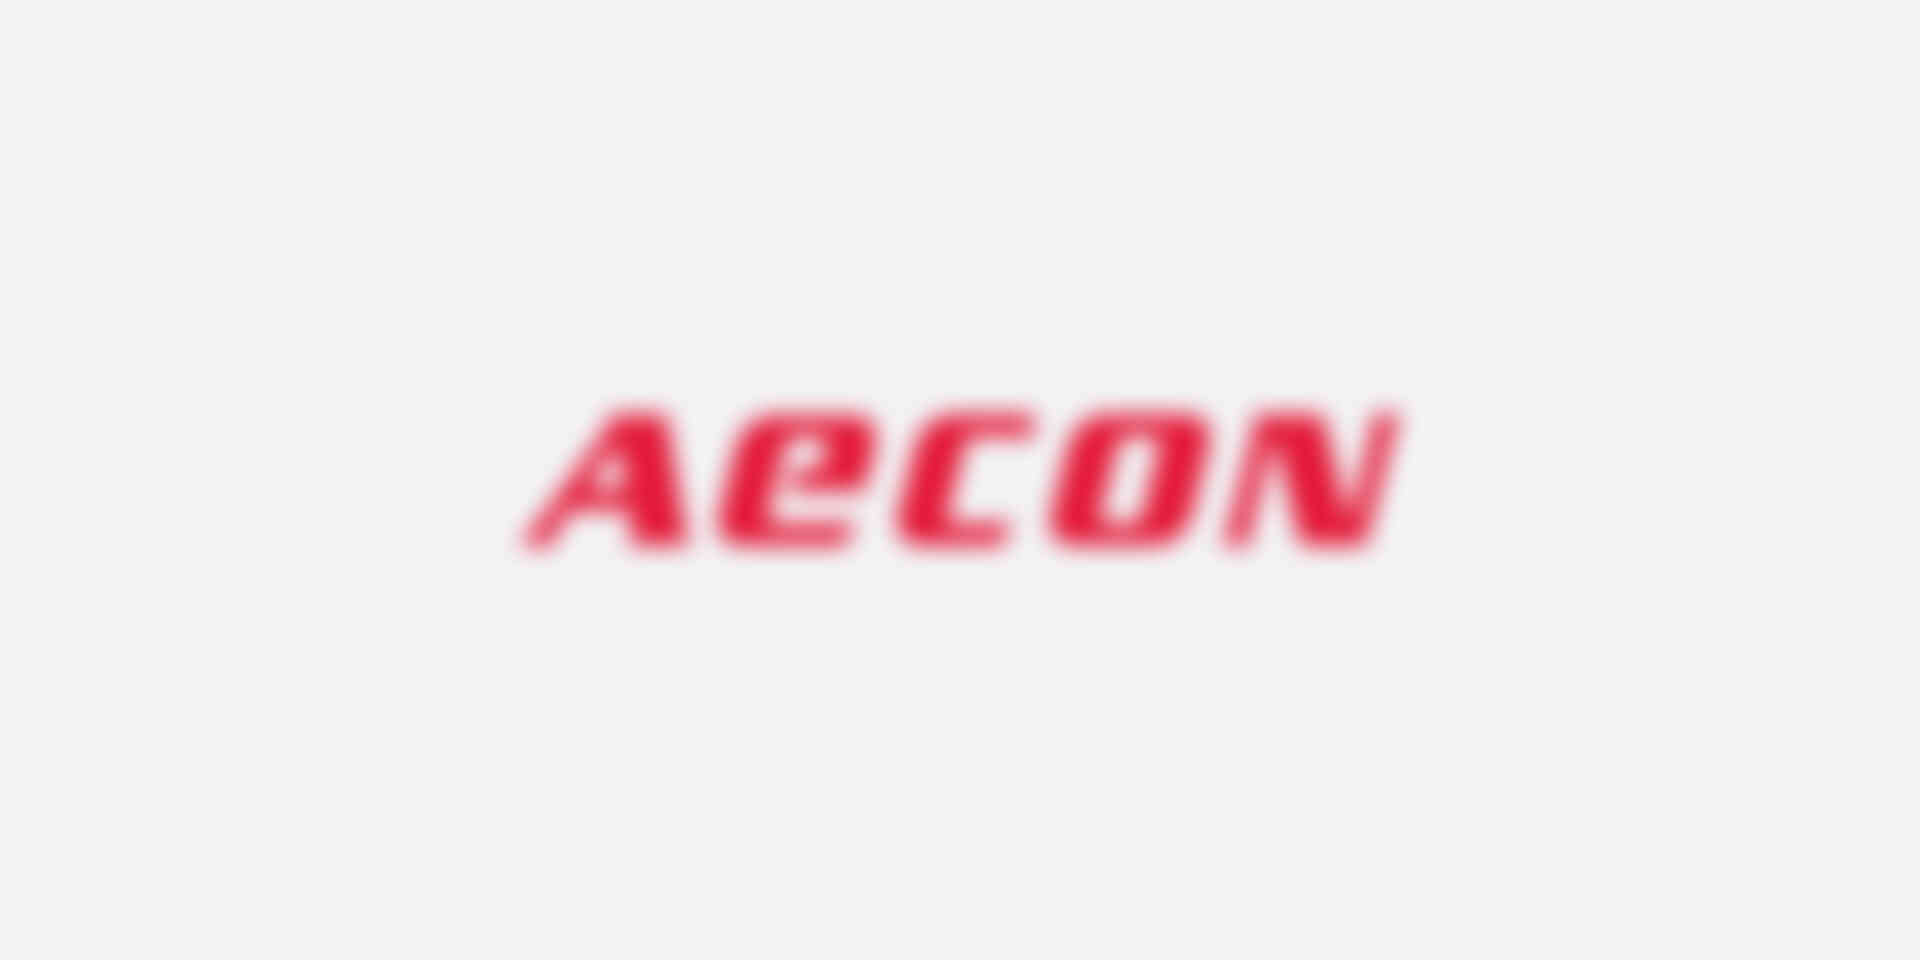 Our clients - engineering-construction-aecon